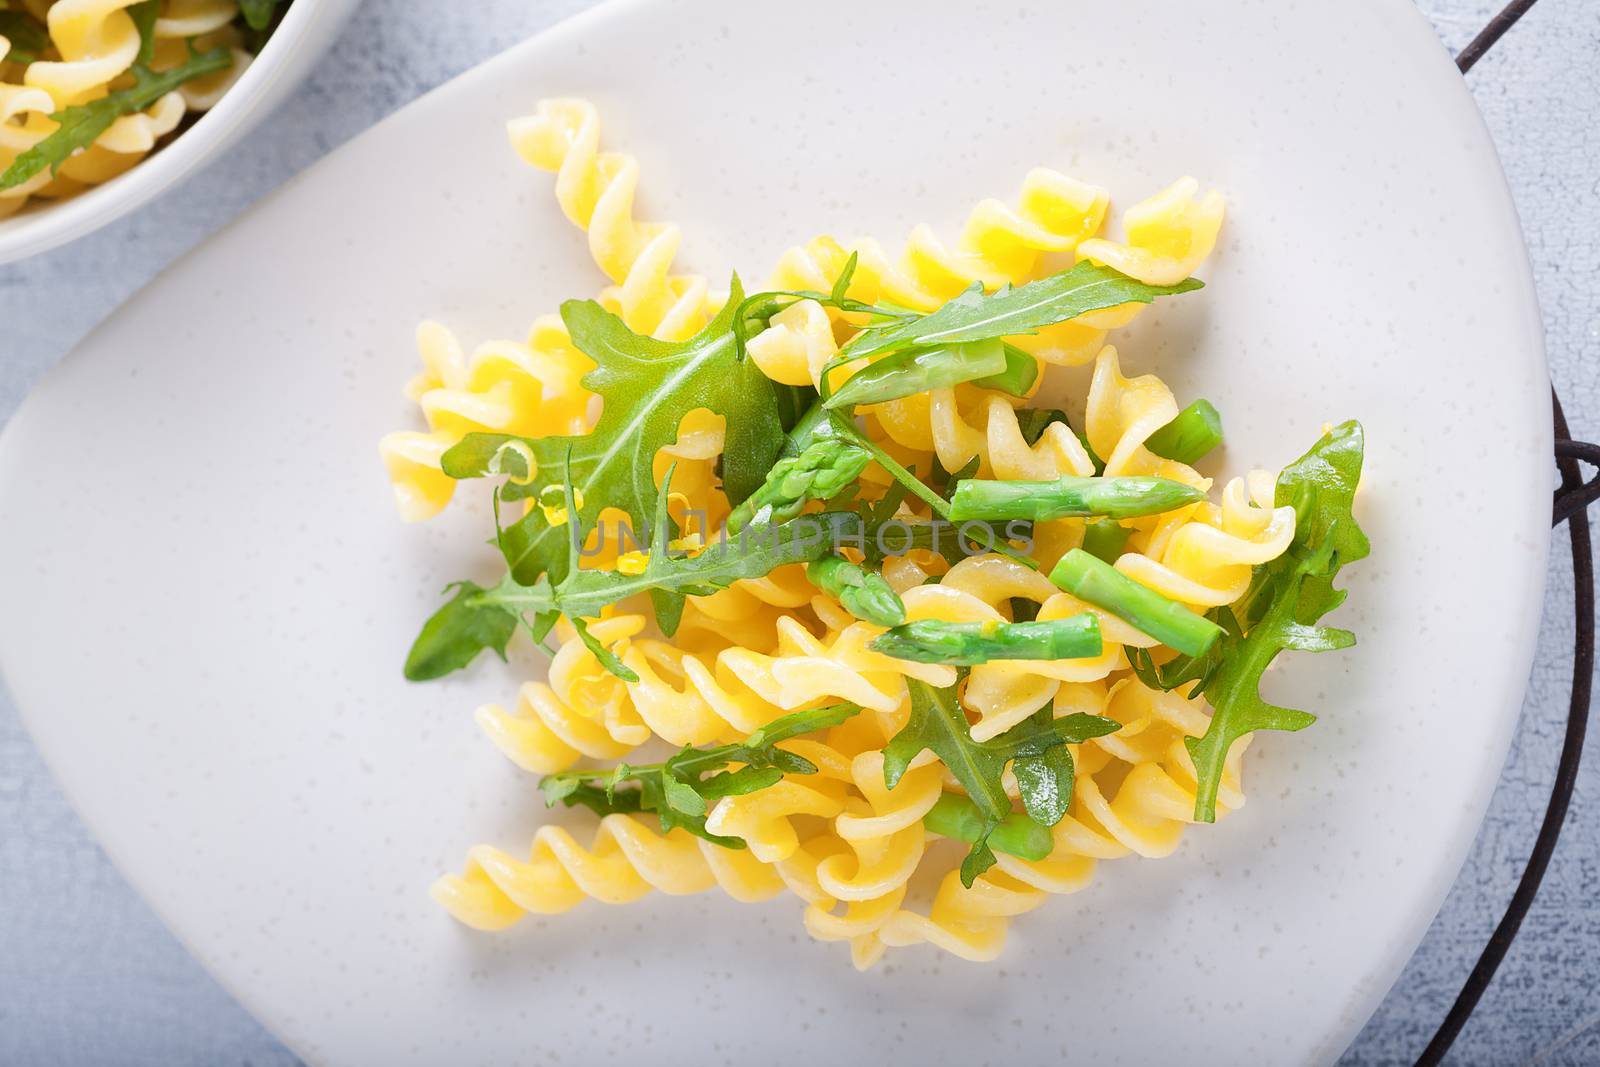 Pasta salad with asparagus and arugula on a plate